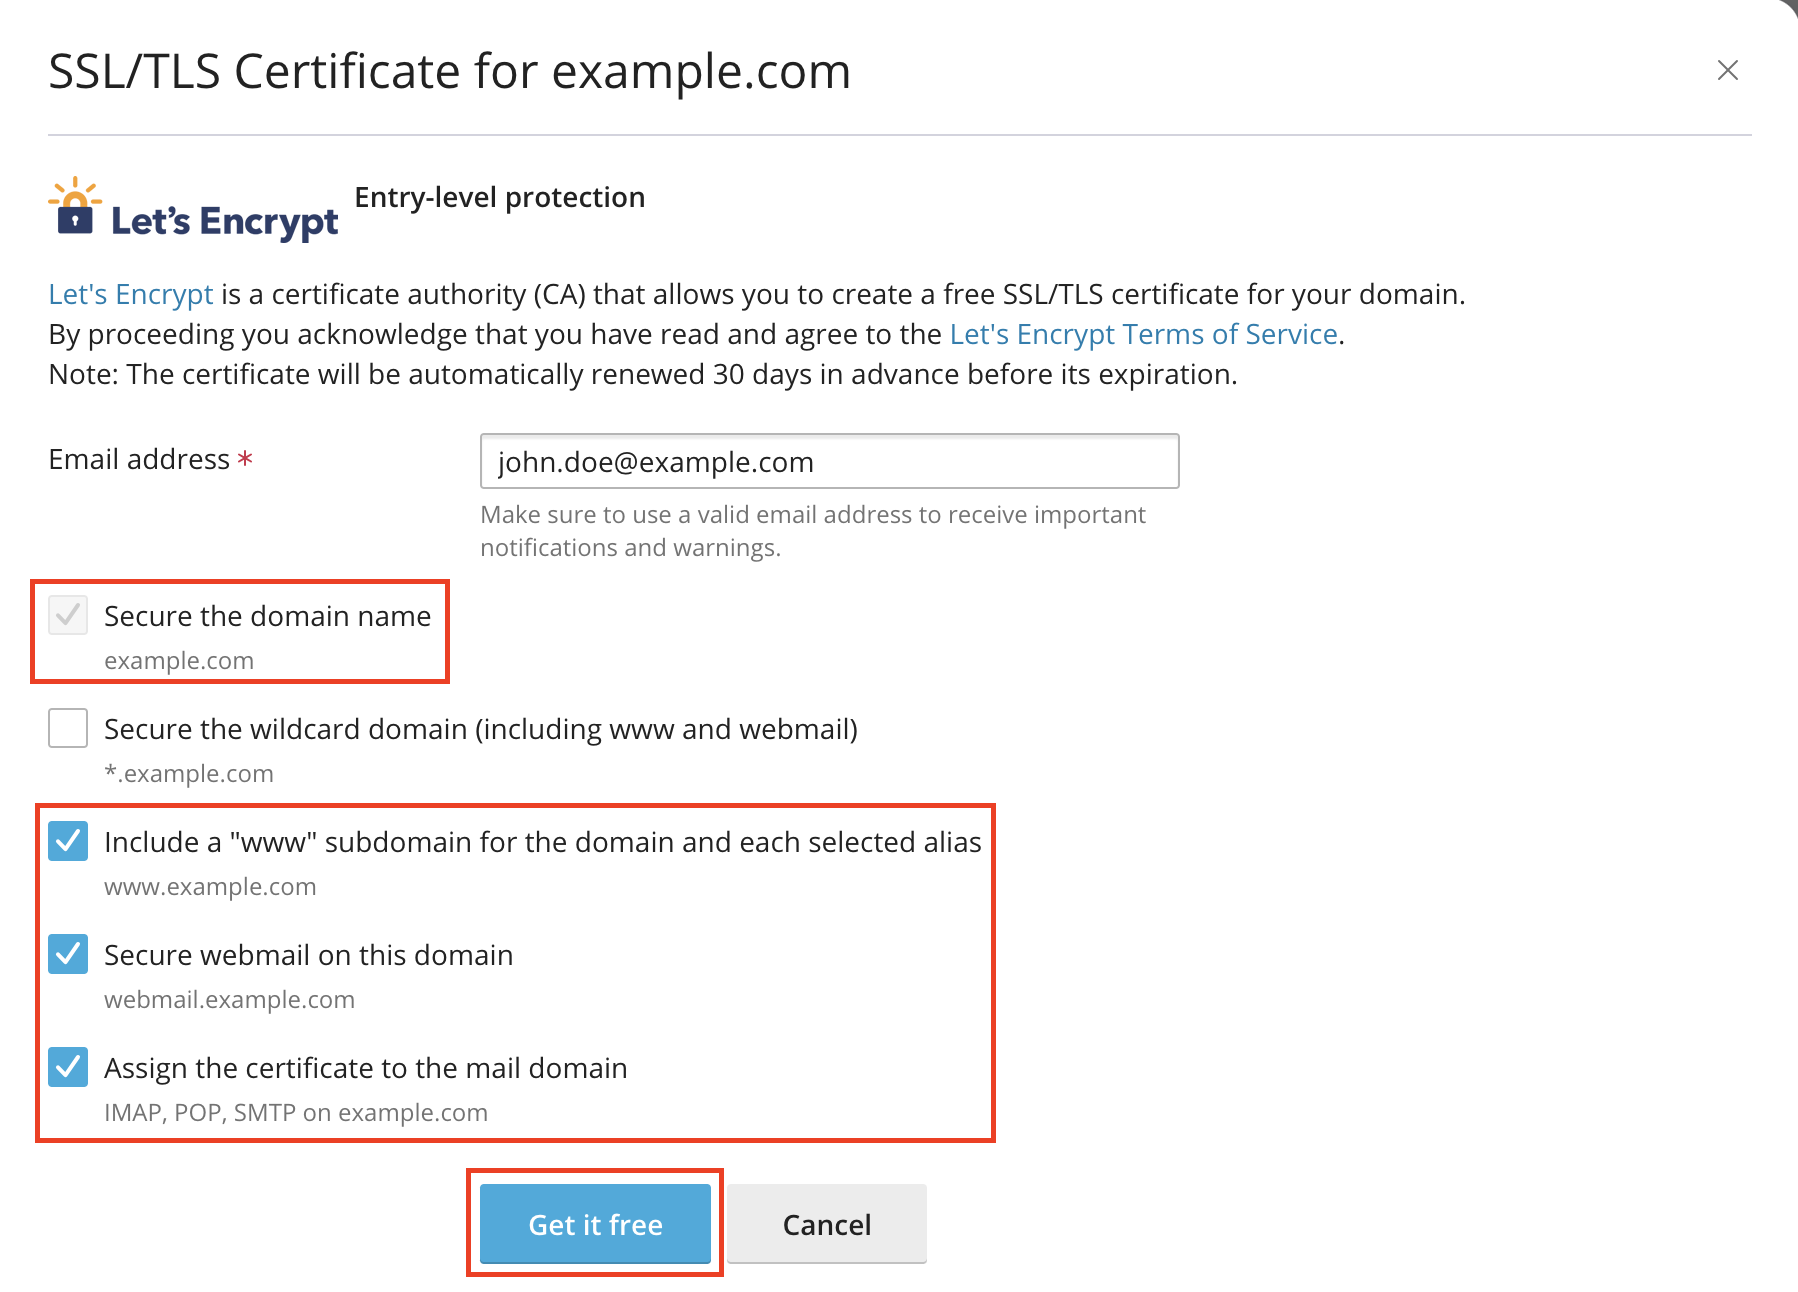 Options for issuing Let's Encrypt certificate